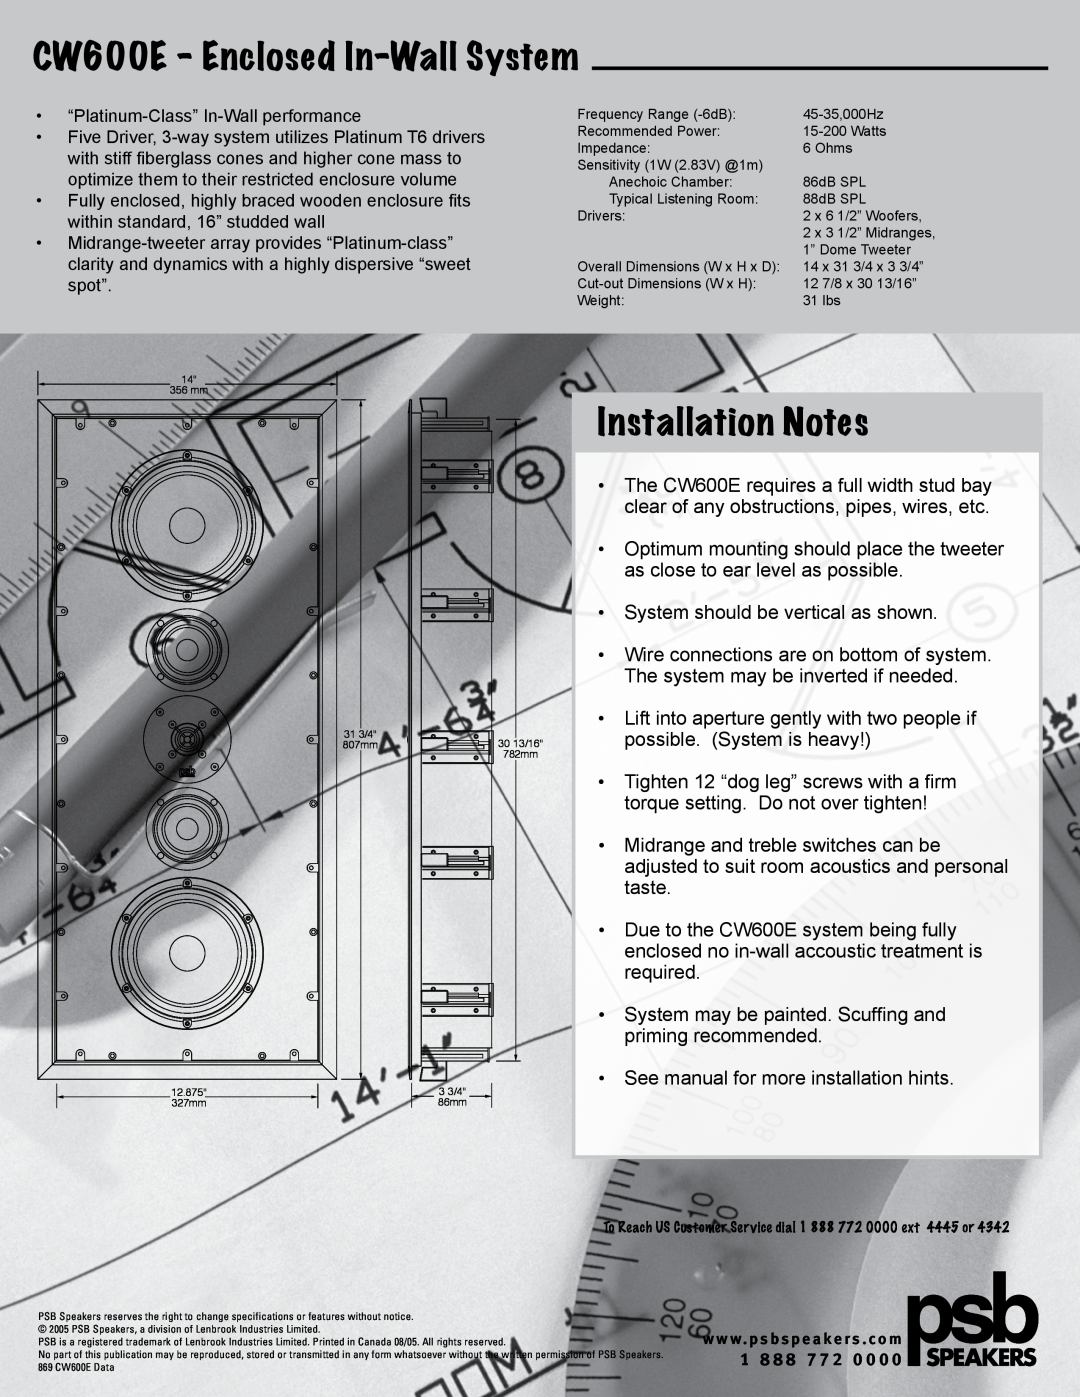 PSB Speakers manual CW600E - Enclosed In-WallSystem, Installation Notes 